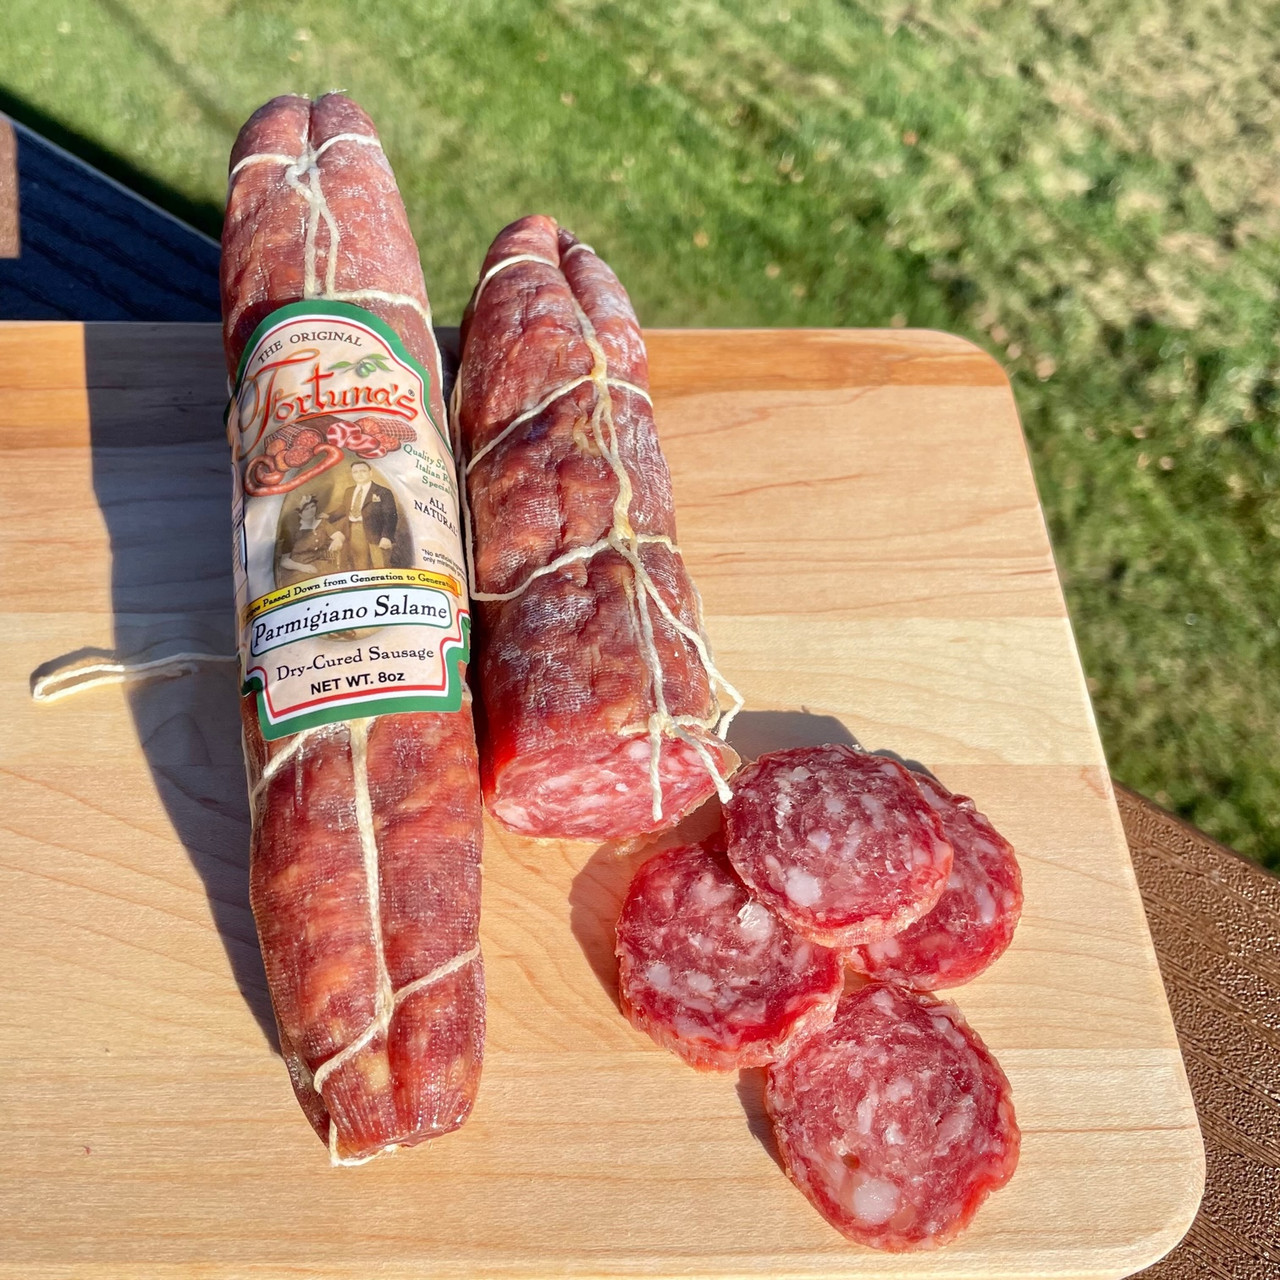 At Fortuna\'s Sausage you with and parmigiano online. cheese and can We All All Dry Quality Natural have salami Traditional, Natural High Sausage, Best the buy